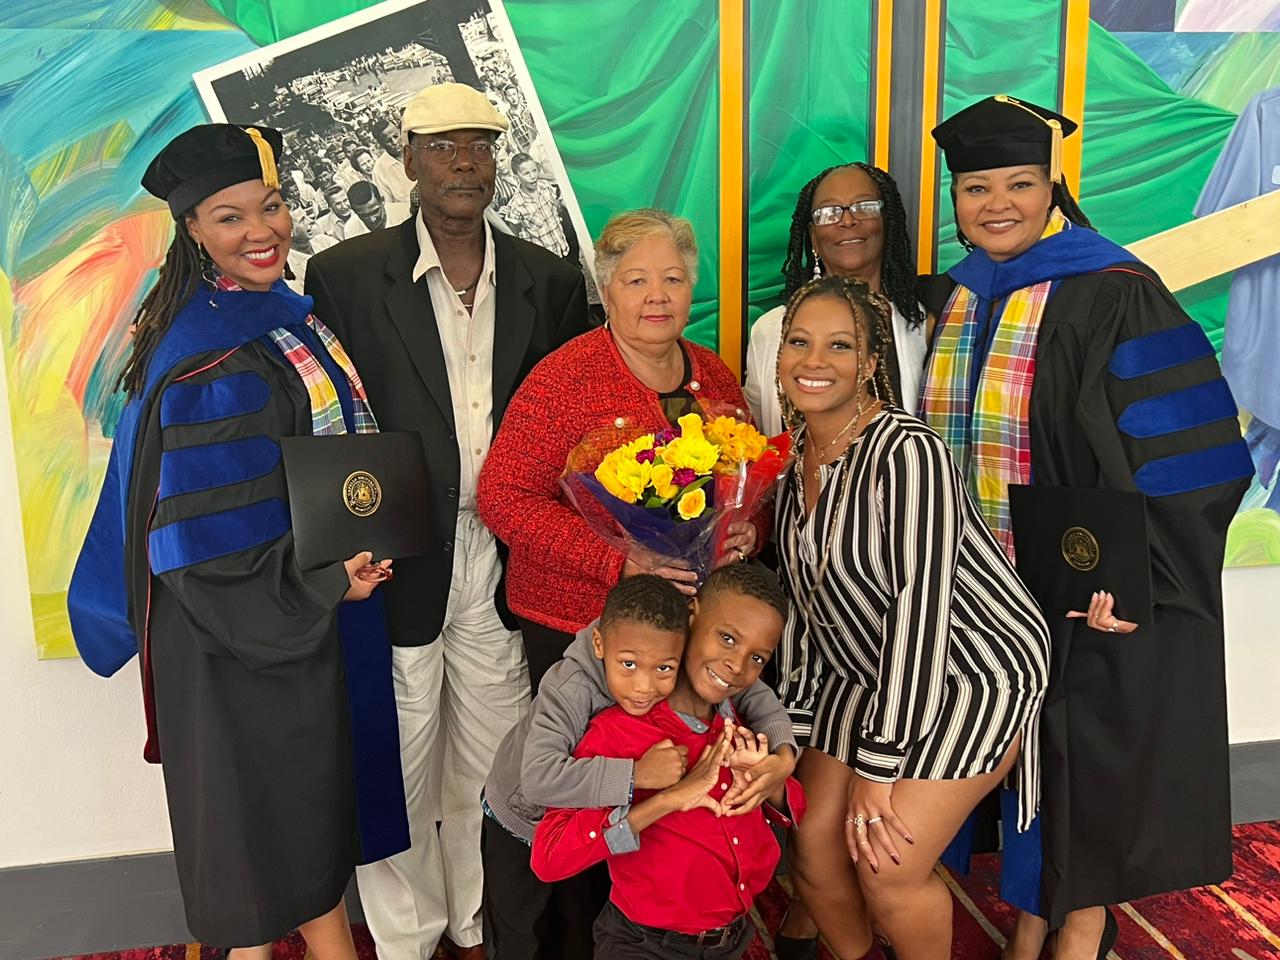 The Simmonds Sisters’ doctoral hooding ceremony was attended by El’Roy Simmonds (father), Carmen Simmonds (mother), Emmeline Simmonds (Aunt), Xauskya Simmonds-Emmanuel (Xaulanda’s Daughter) and Taino Khing and Khnum Xau (Khnuma’s sons). (Submitted photo)